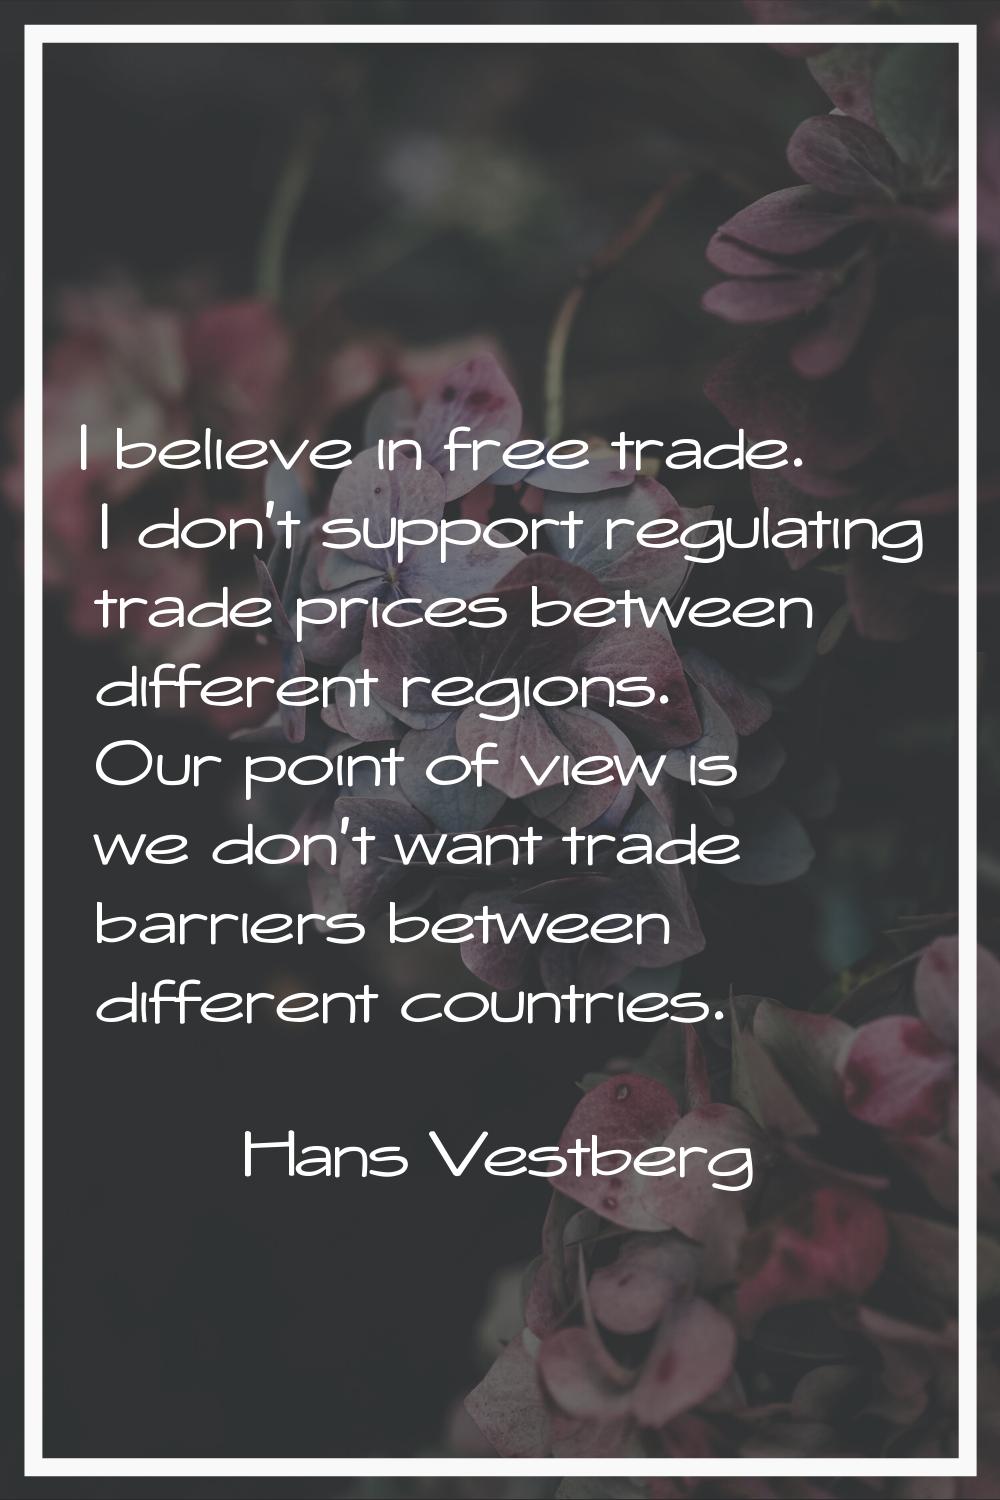 I believe in free trade. I don't support regulating trade prices between different regions. Our poi